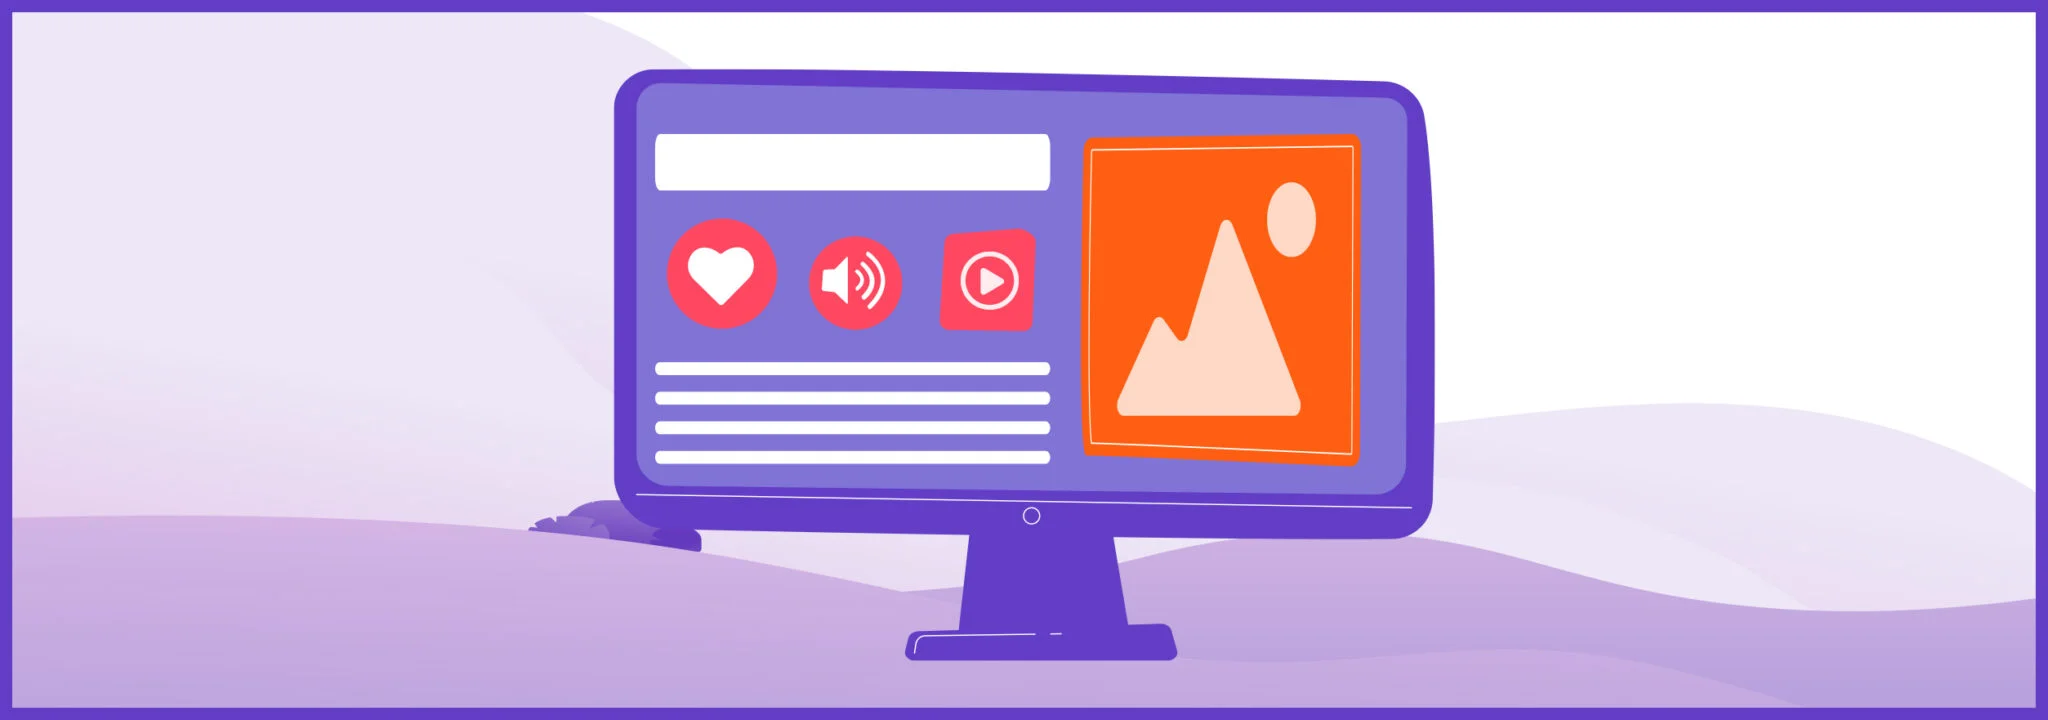 Illustration of a desktop monitor displaying a social media interface with icons for a heart, sound, play button, and an image with a warning triangle, set against a soft purple backdrop. This represents a user-friendly guide for integrating ads into a website's layout